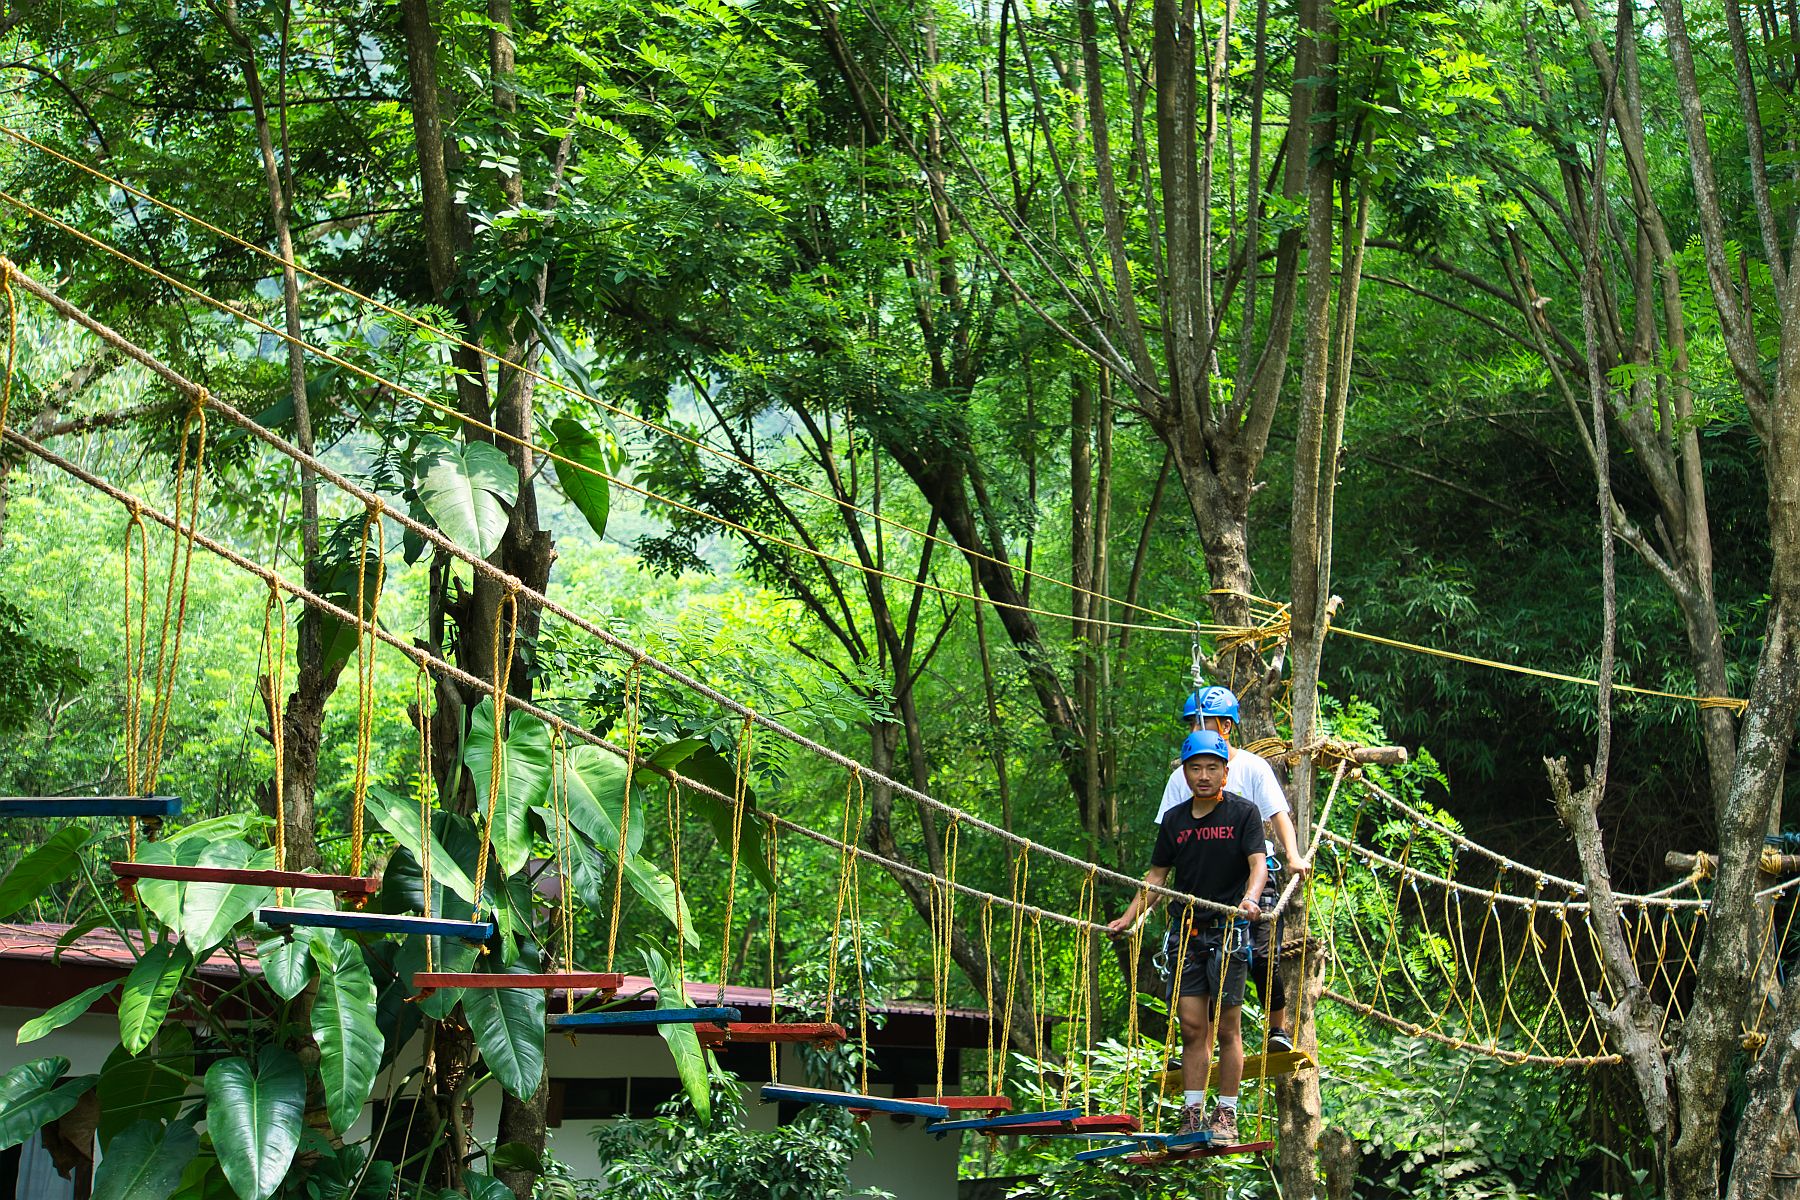 High Rope challenge course in Sikkim